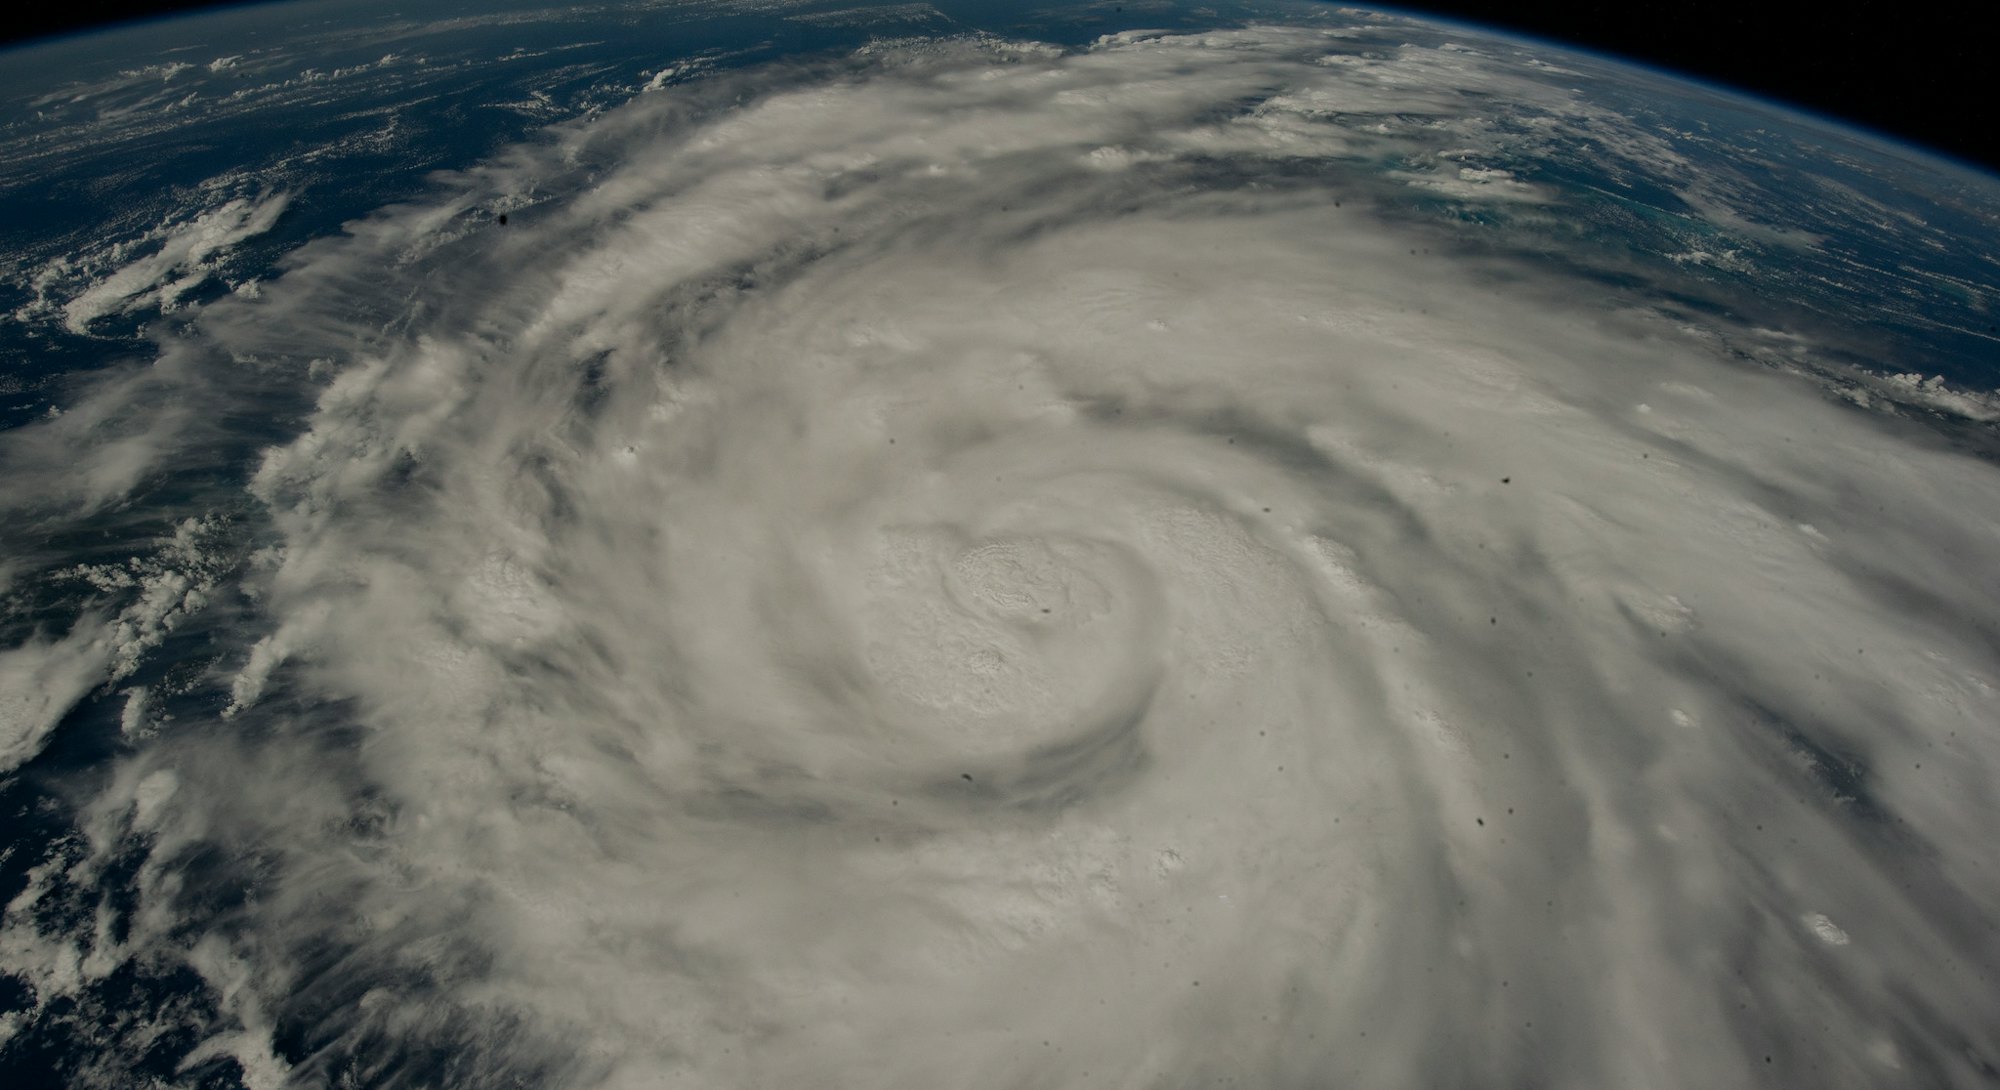 Hurricane Ian, swirled into a spiral, is visible from a birds eye view from the ISS over the Caribbe...